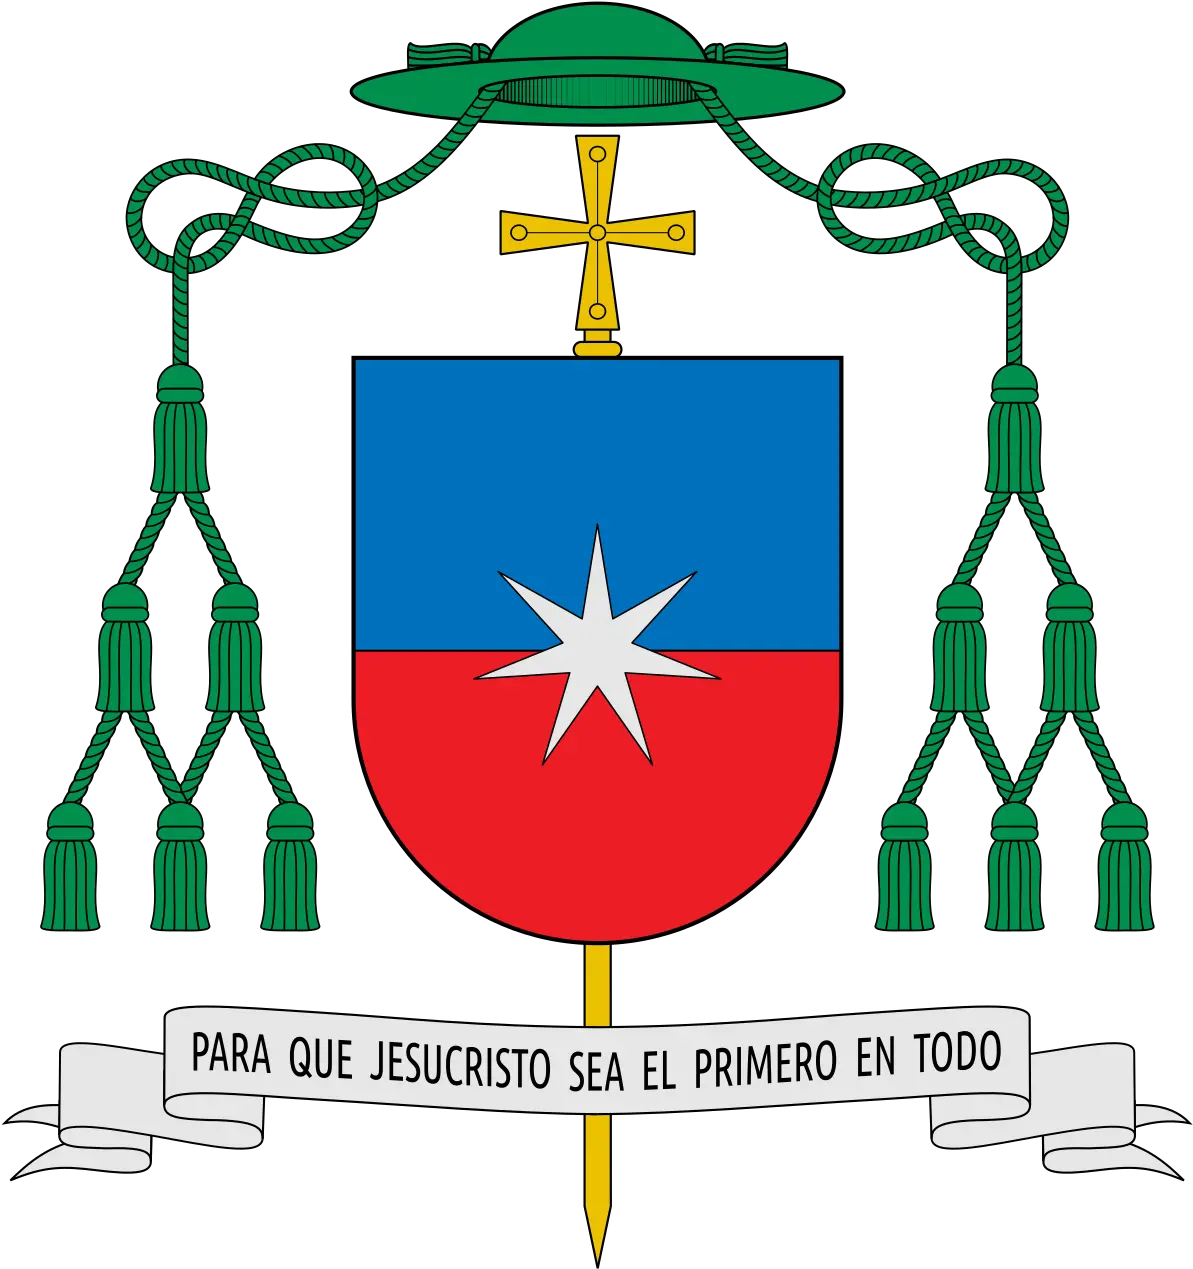 Filecoat Of Arms Pedro Ignacio Wolcan Olanosvg Wikipedia Bishop Barron Coat Of Arms Png Jesucristo Png